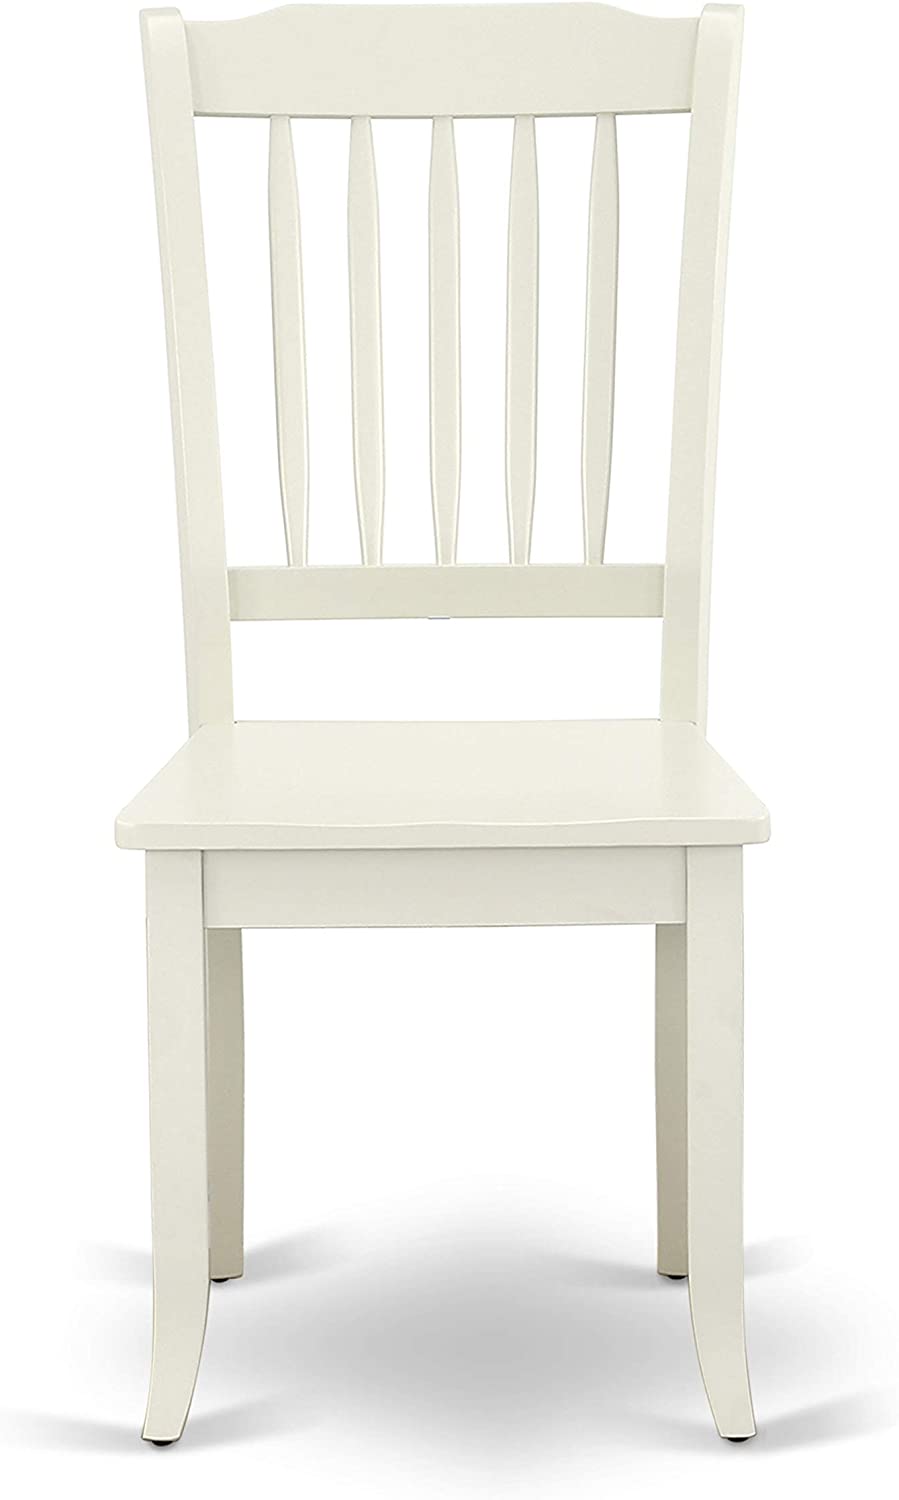 East West Furniture 5PC Round 36 inch Table and 4 vertical slatted Chairs, Buttermilk &amp; Cherry